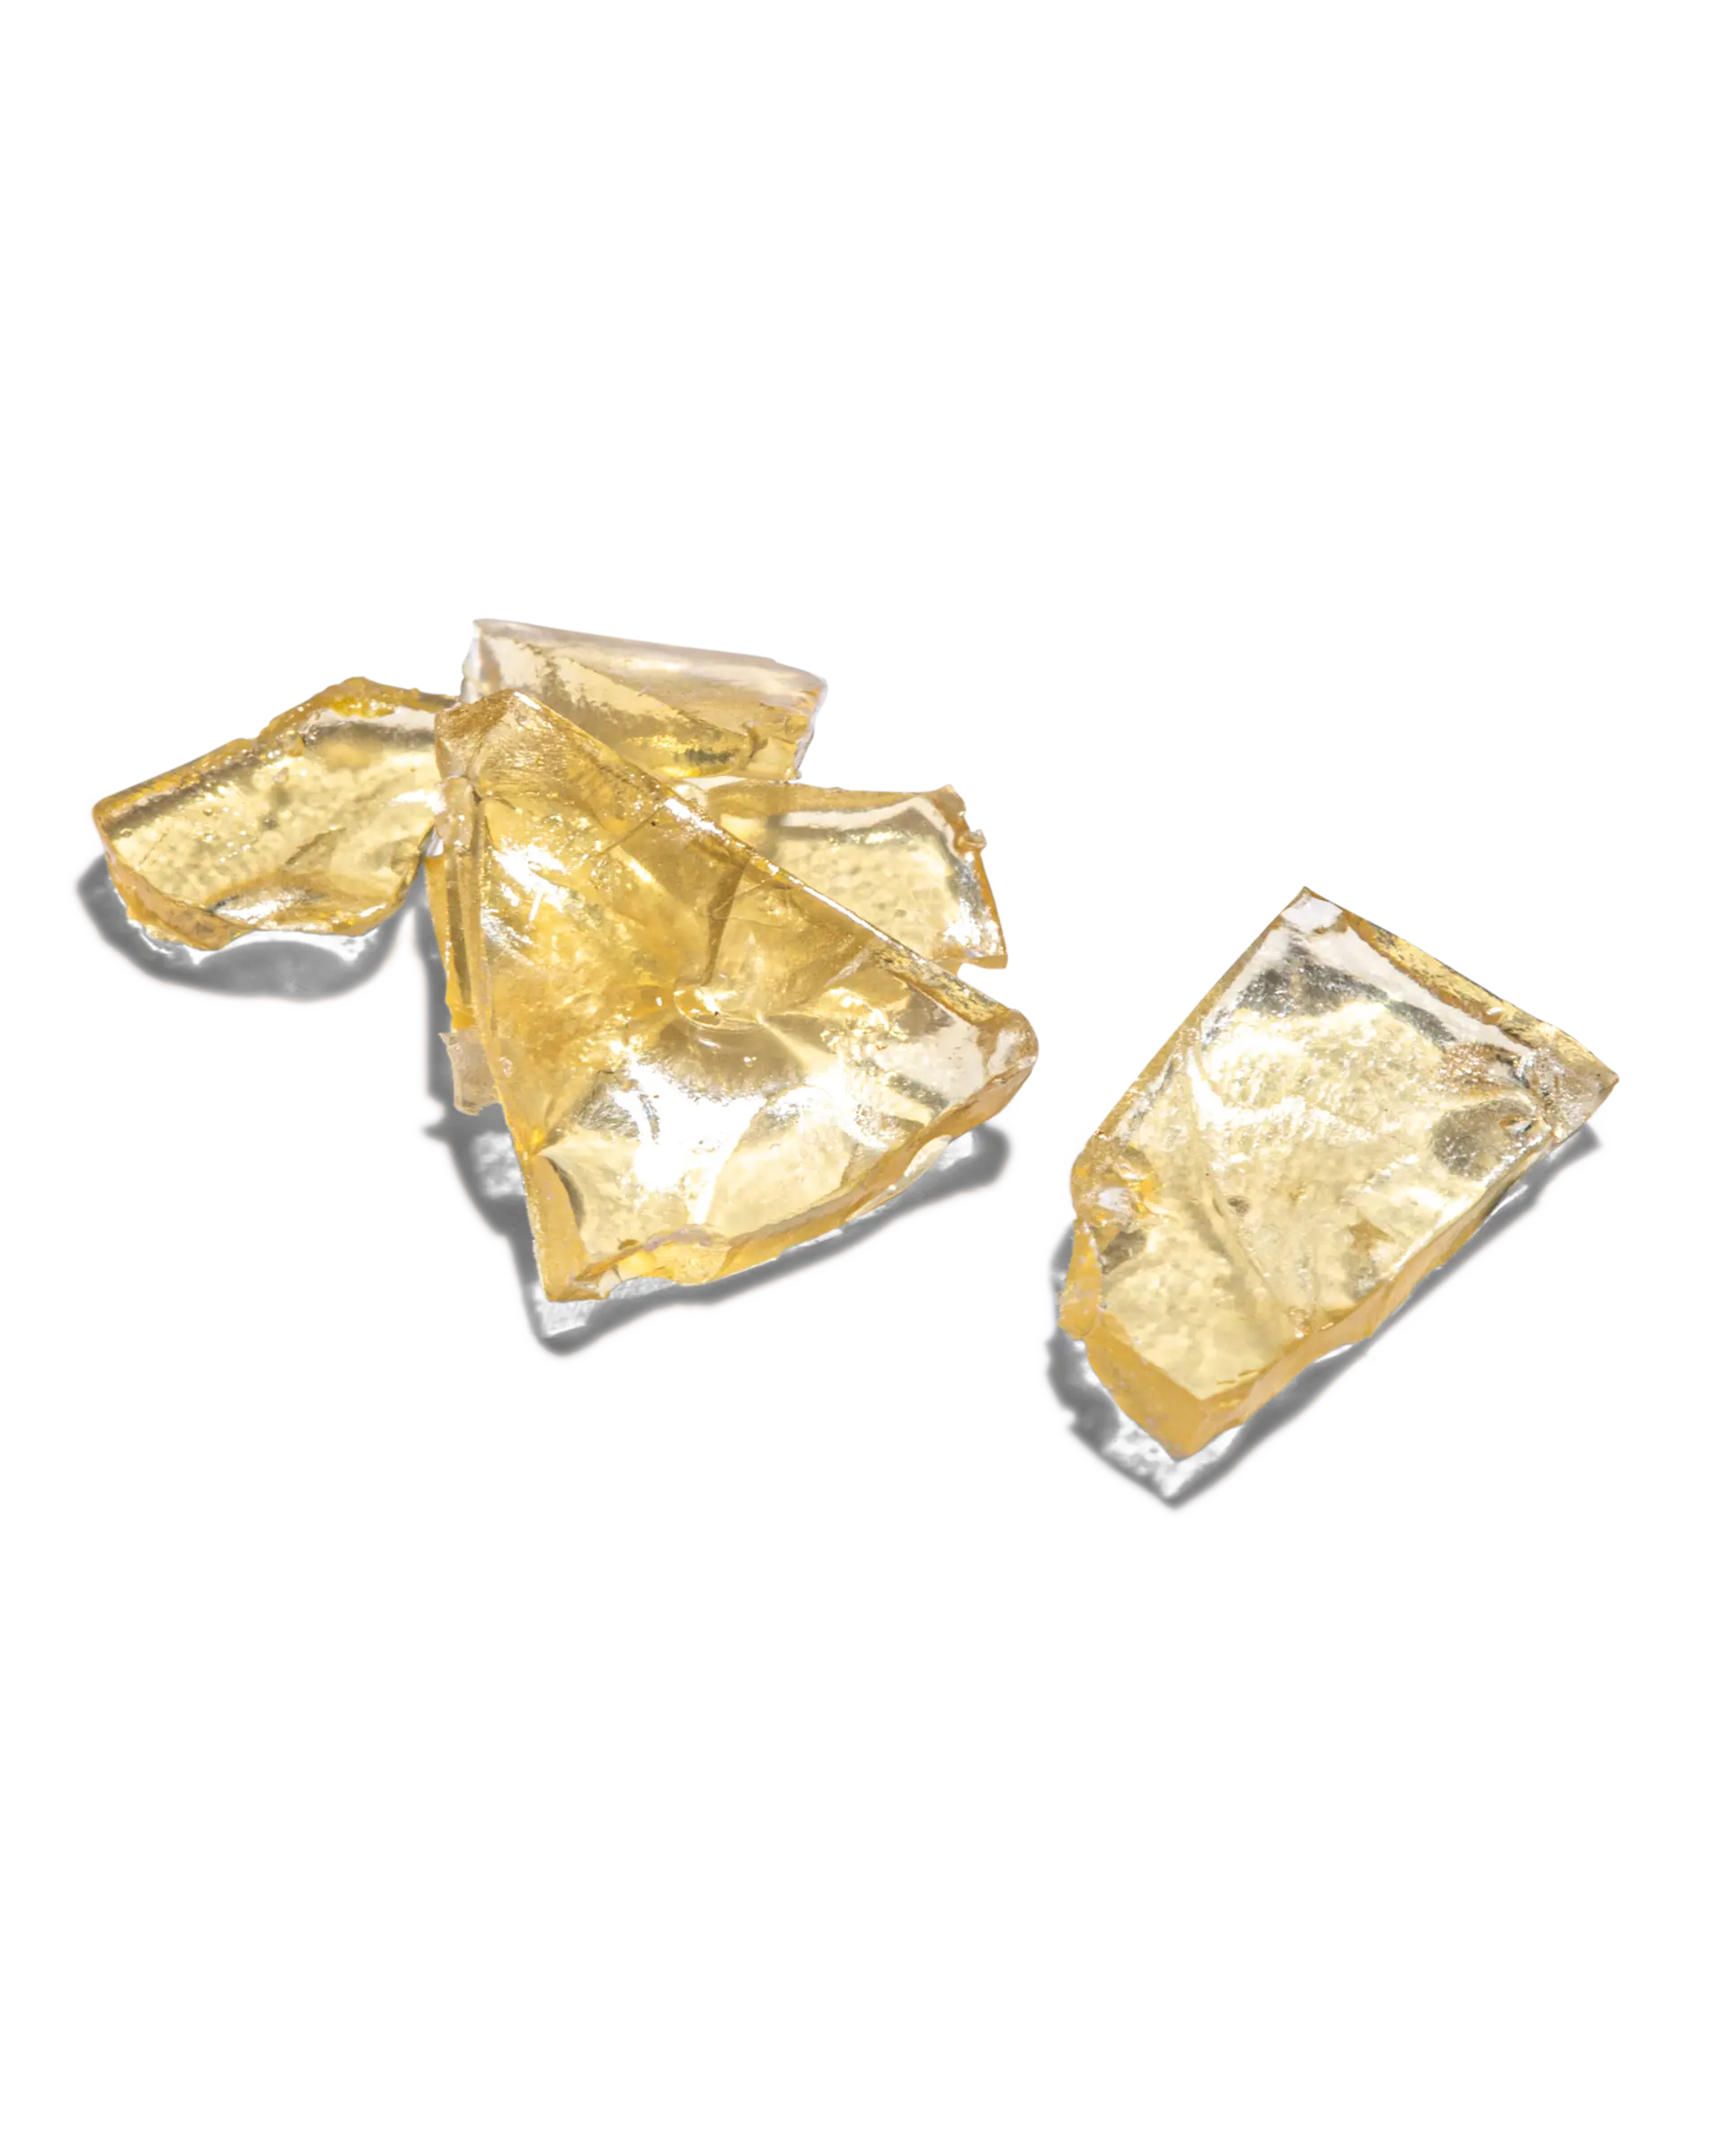 Sour Chemicals Shatter 1g, 2 of 2